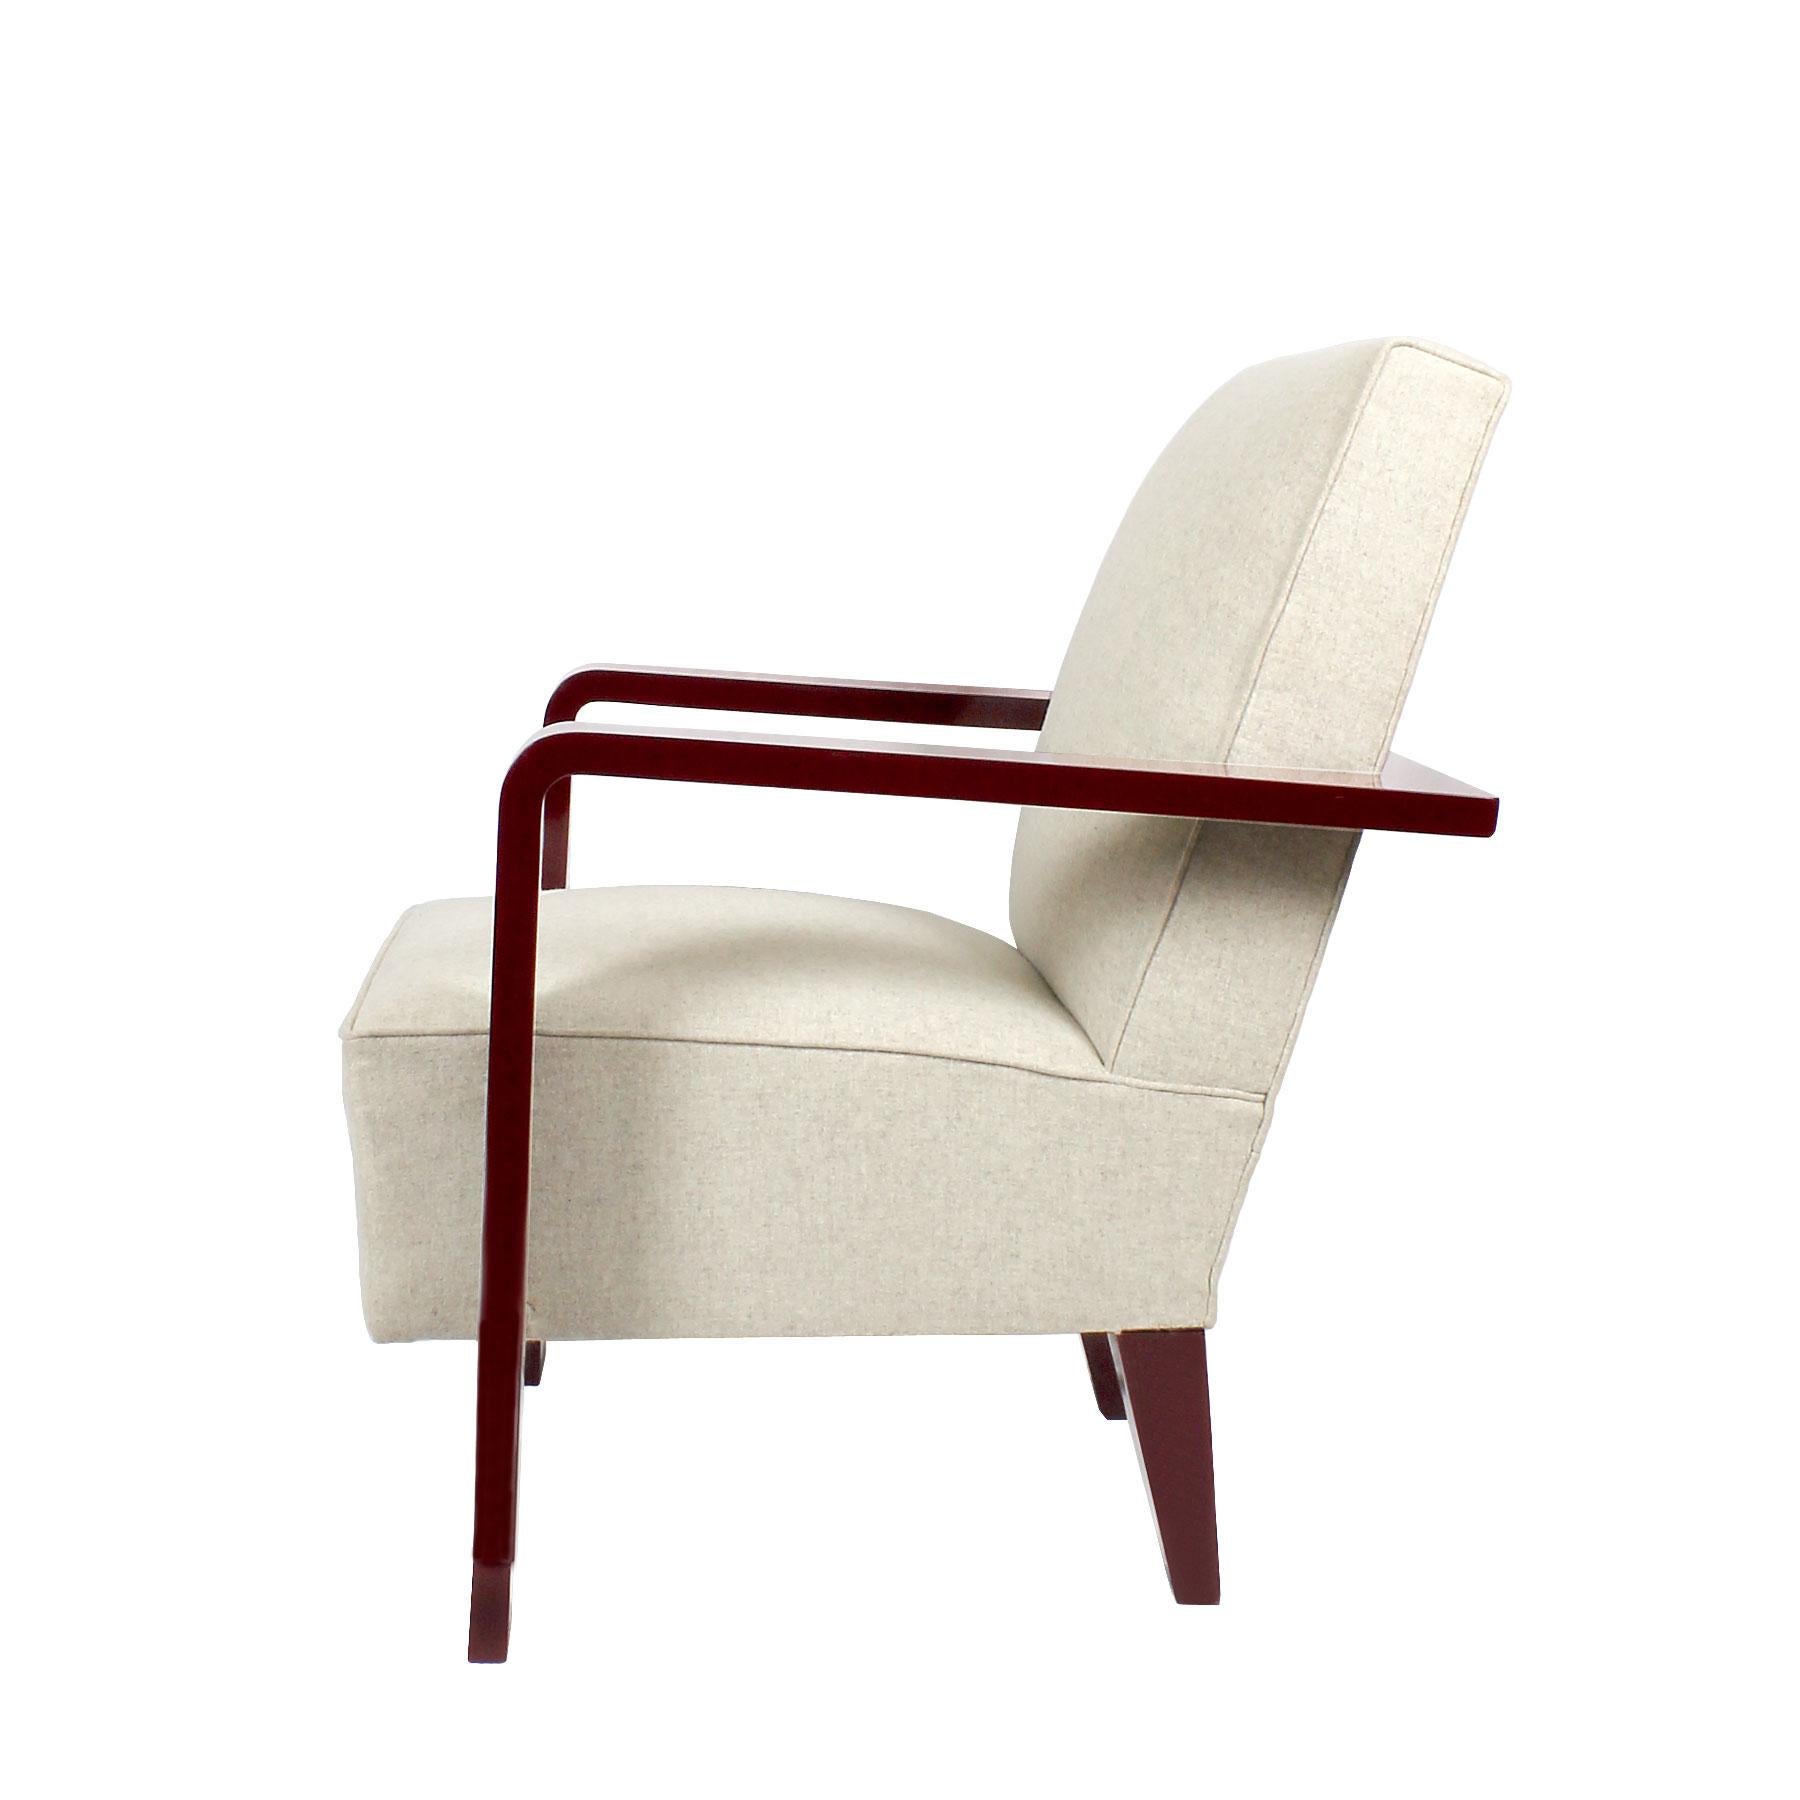 1930s Art Deco Armchair, Lacquered Beech, Off-White Wool - Belgium In Good Condition For Sale In Girona, ES